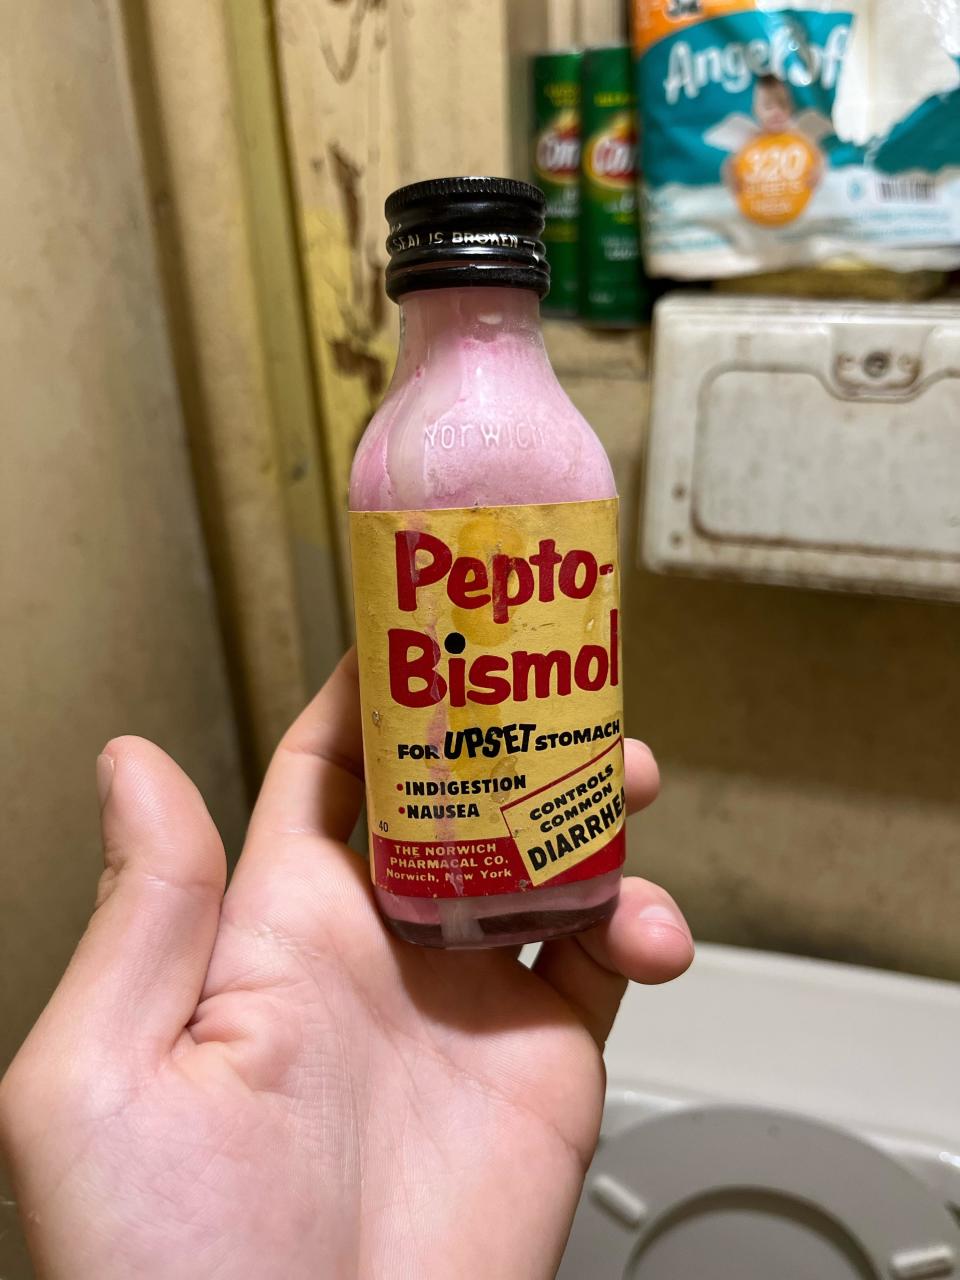 You'd need some Pepto for sure after drinking that old Pepto.